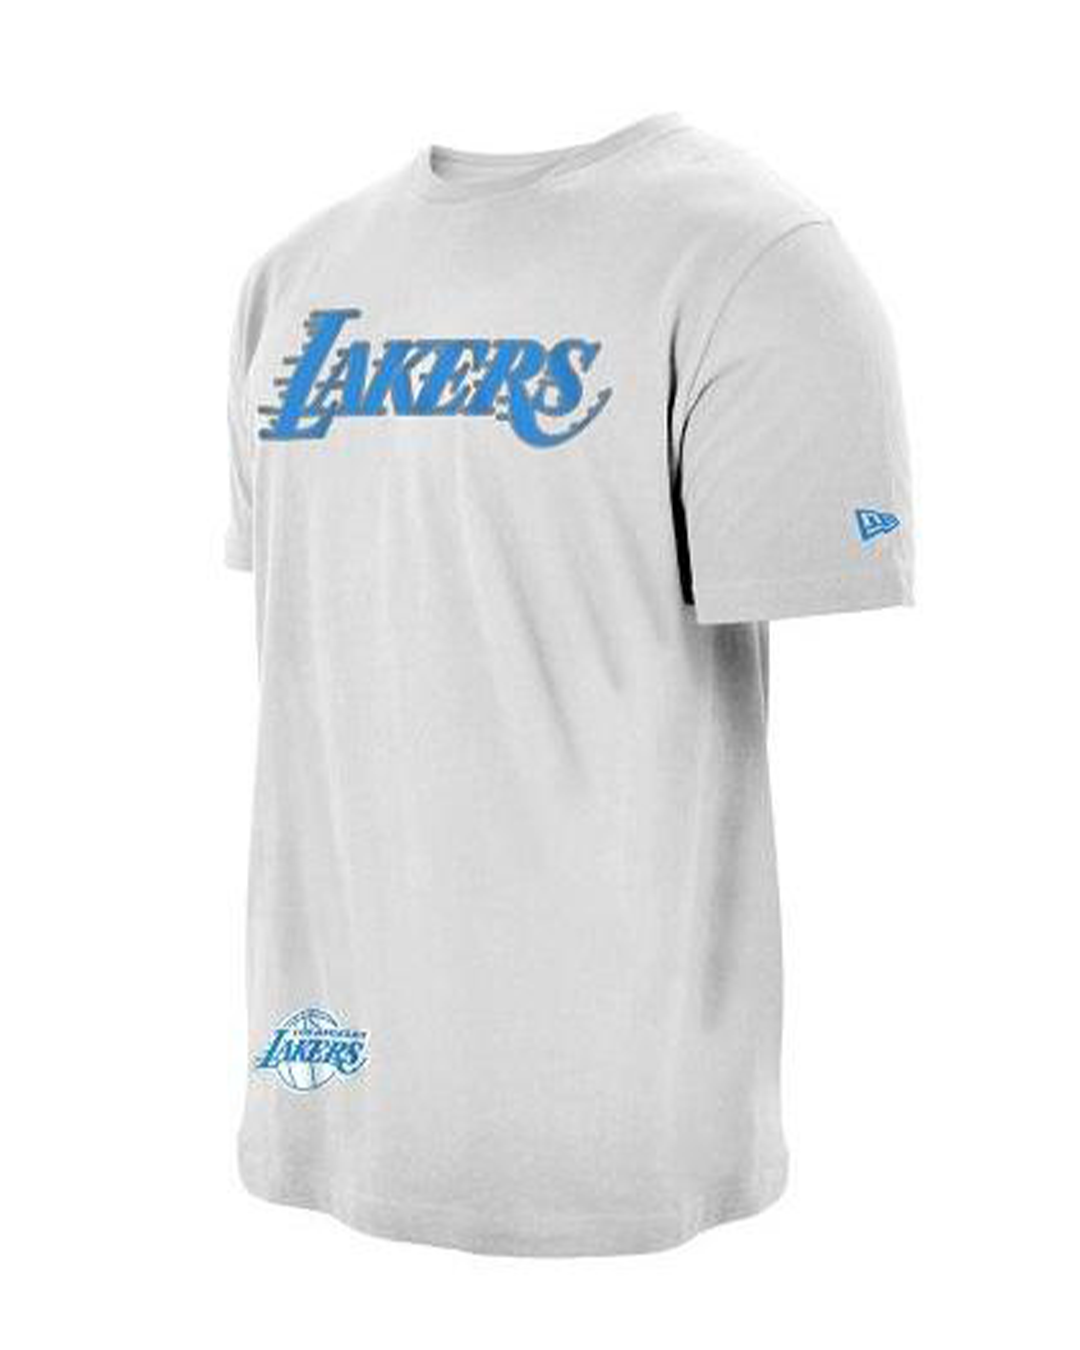 City Edition Brushed Los Angeles Lakers Tee - Lakers Store